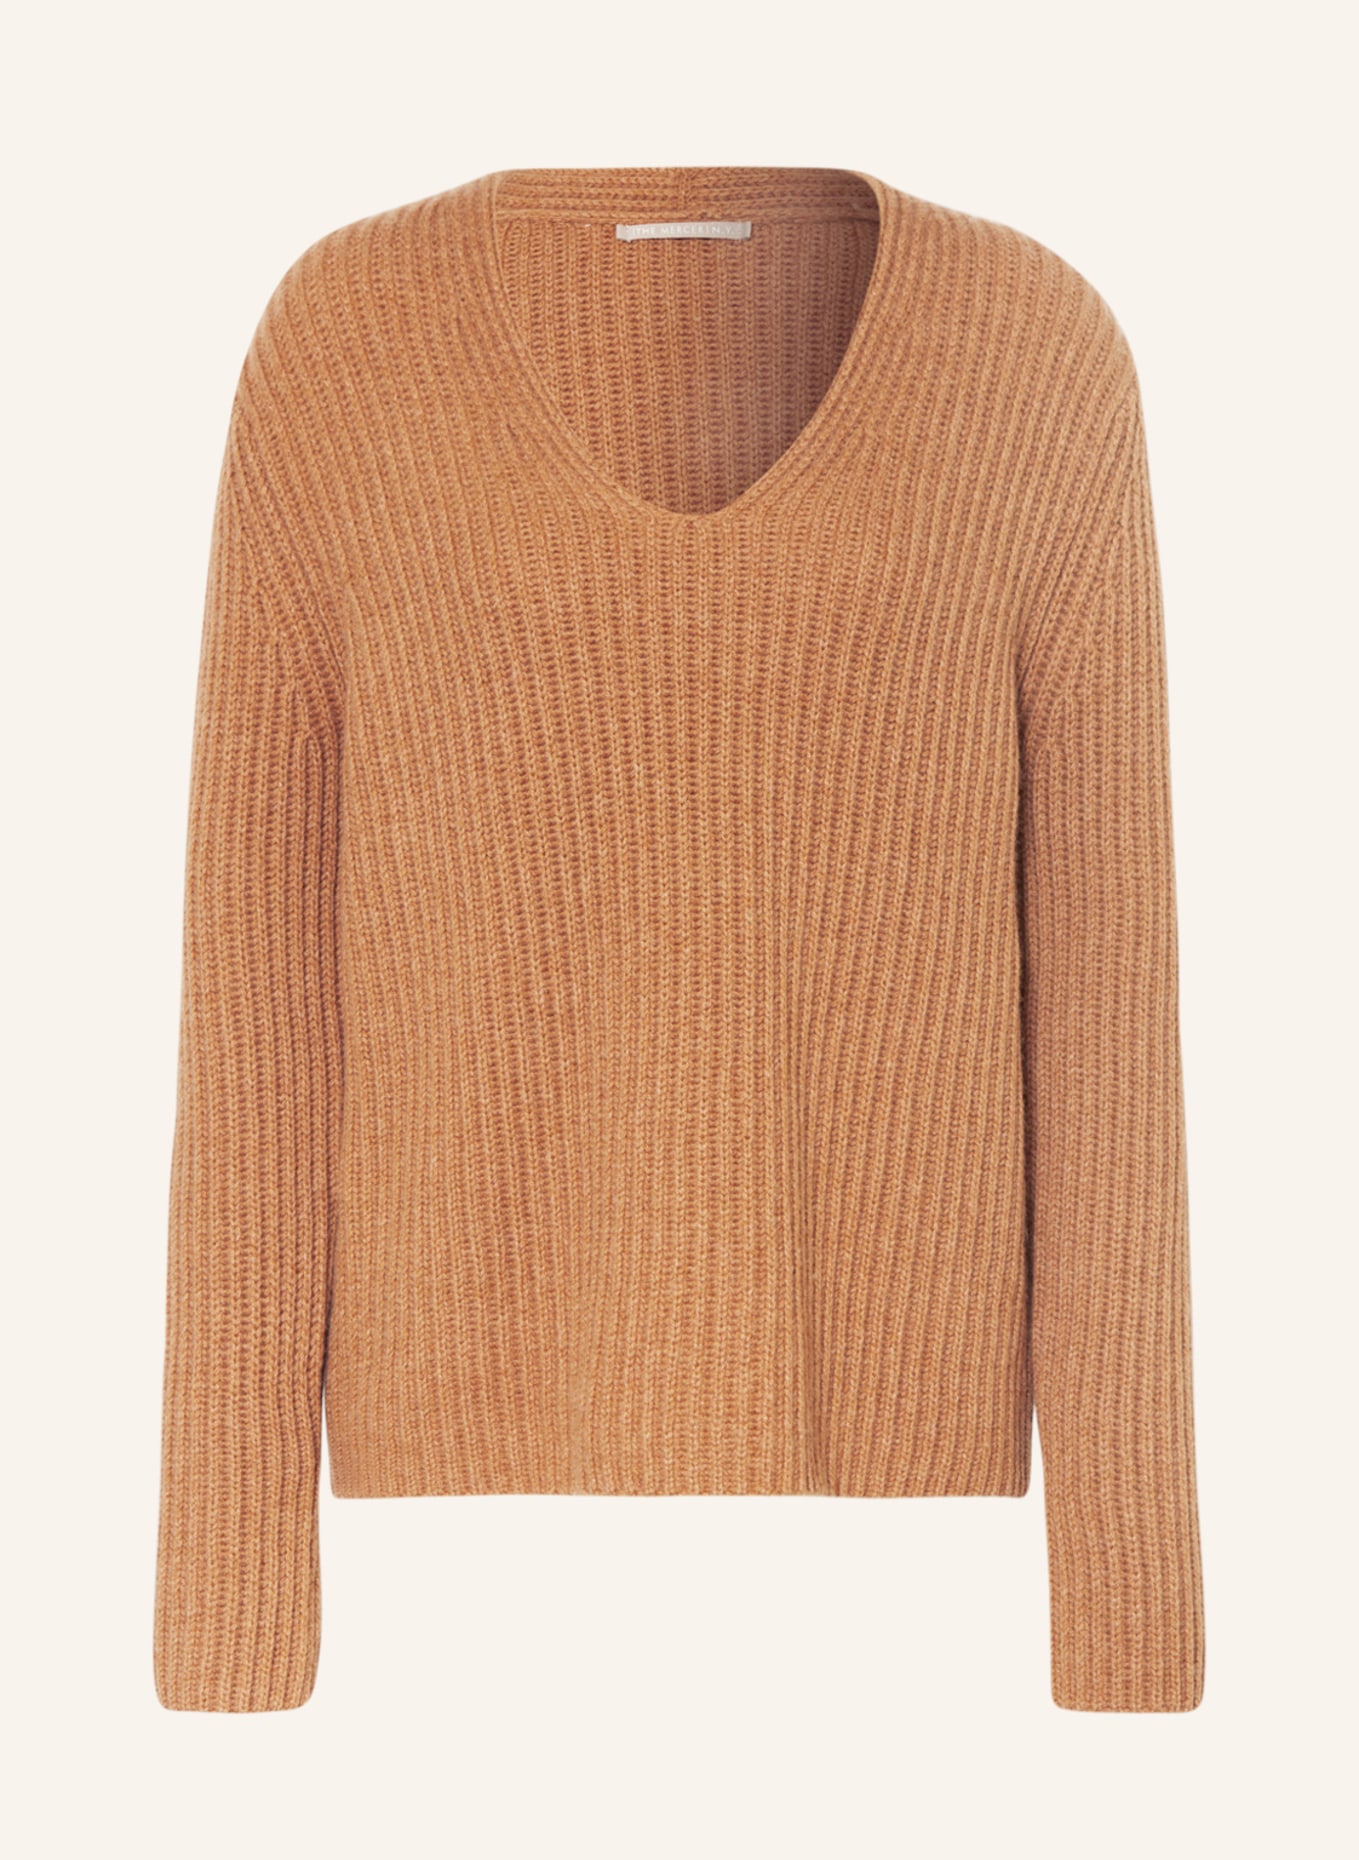 (THE MERCER) N.Y. Cashmere sweater, Color: LIGHT BROWN (Image 1)